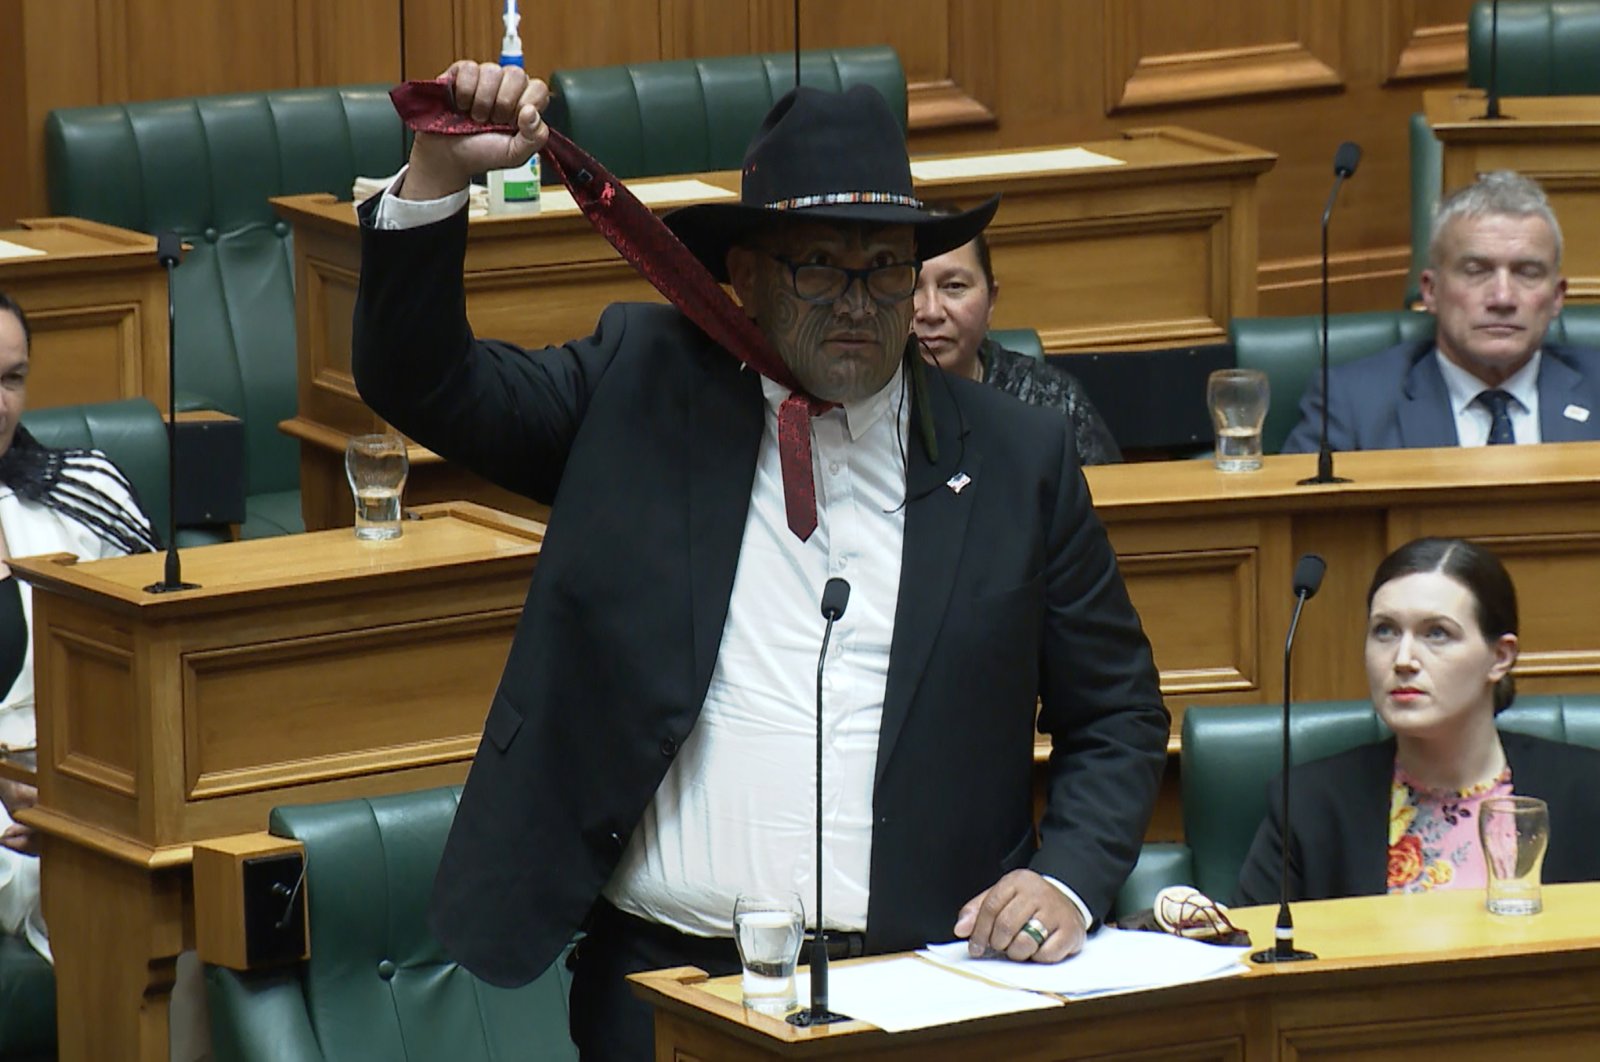 Co-leader of New Zealand's Maori party Rawiri Waititi simulates a noose in this television frame grab taken from TVNZ television on Dec. 3, 2020 (AFP)